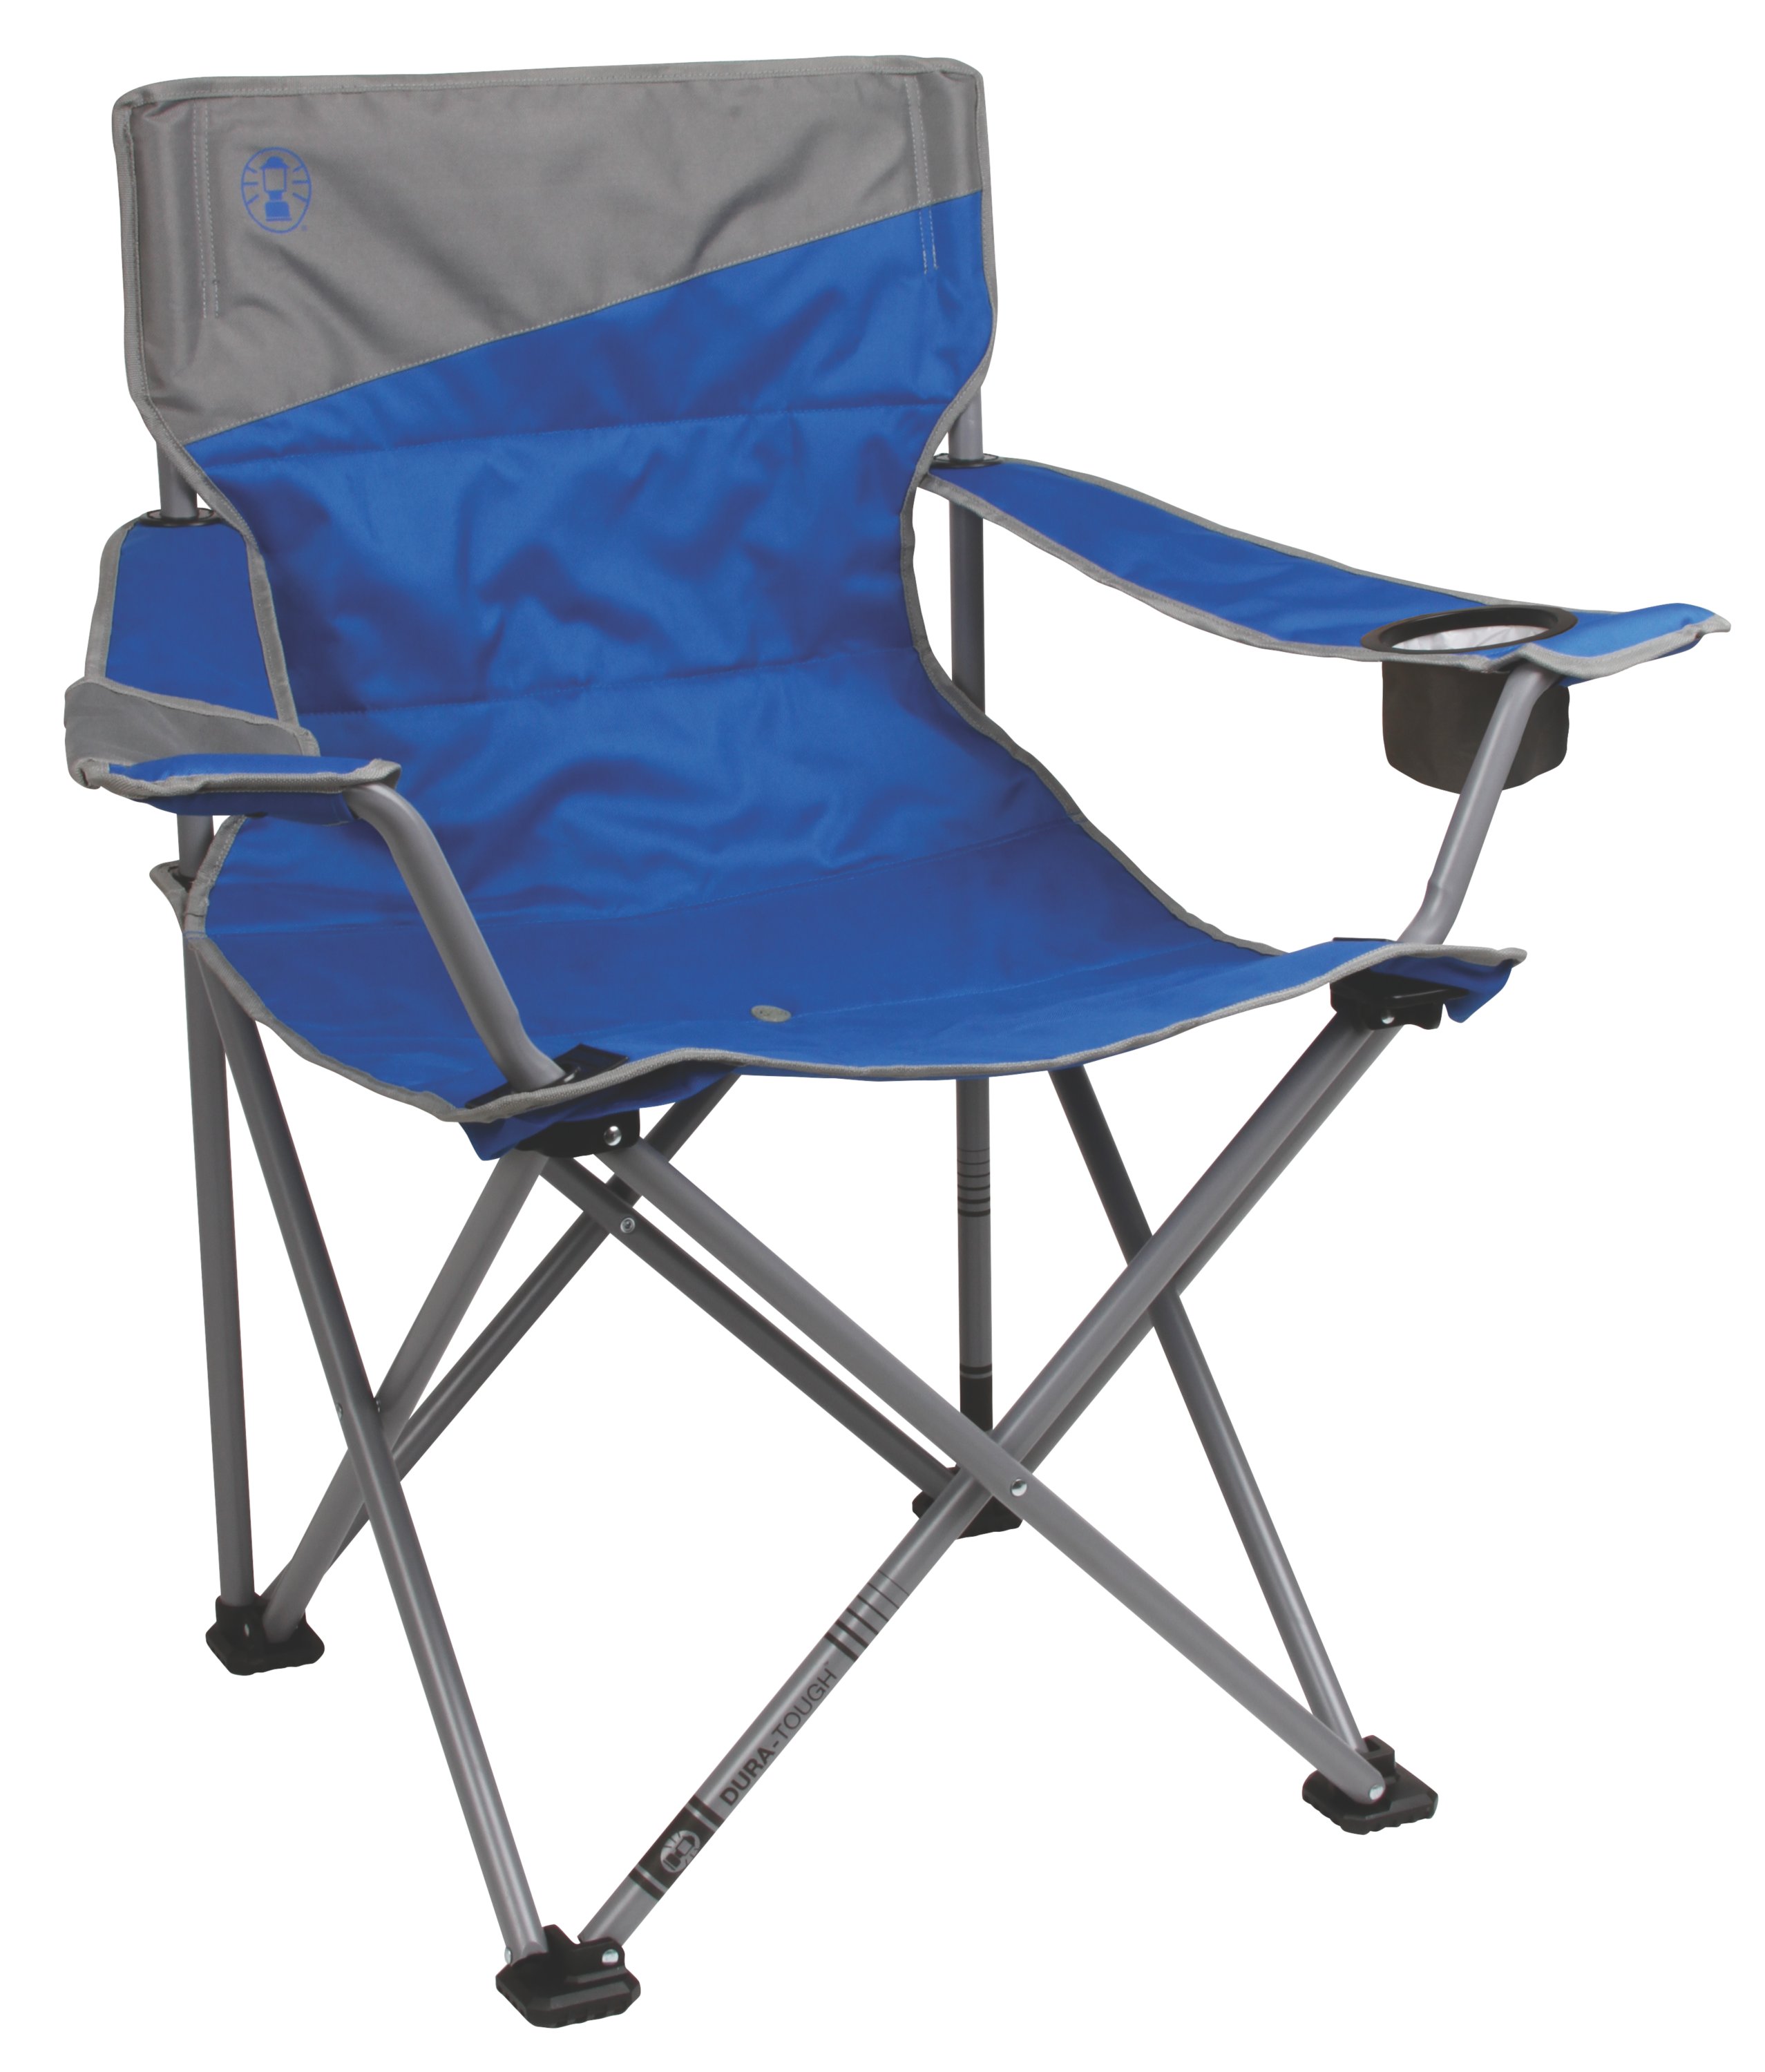 Outdoor Ultimate Fishing Chair Camping Folding Chair with Big Ice